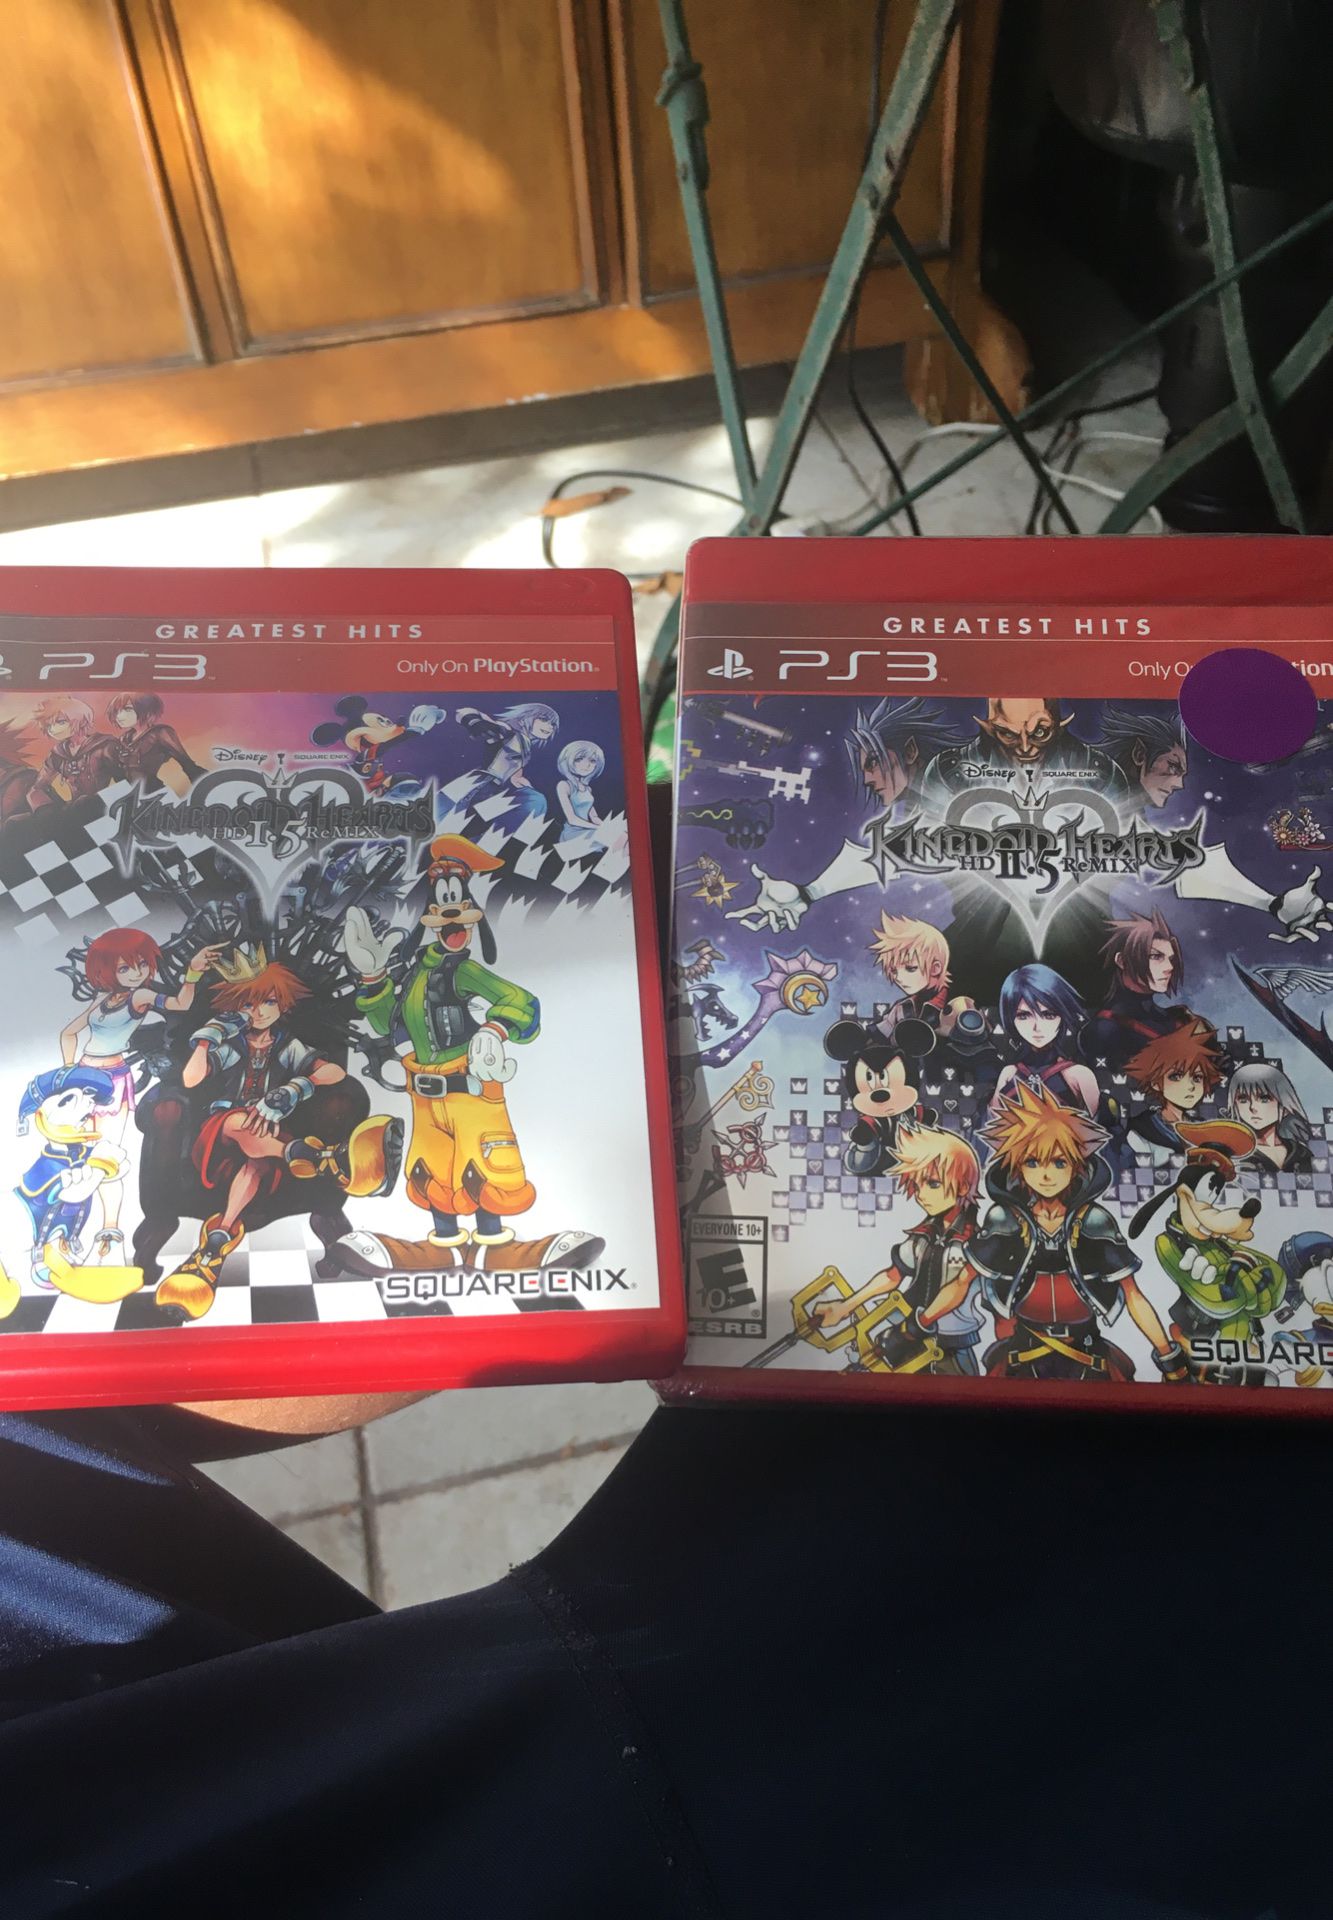 Kingdom hearts 1.5 and 2.5 for PS3